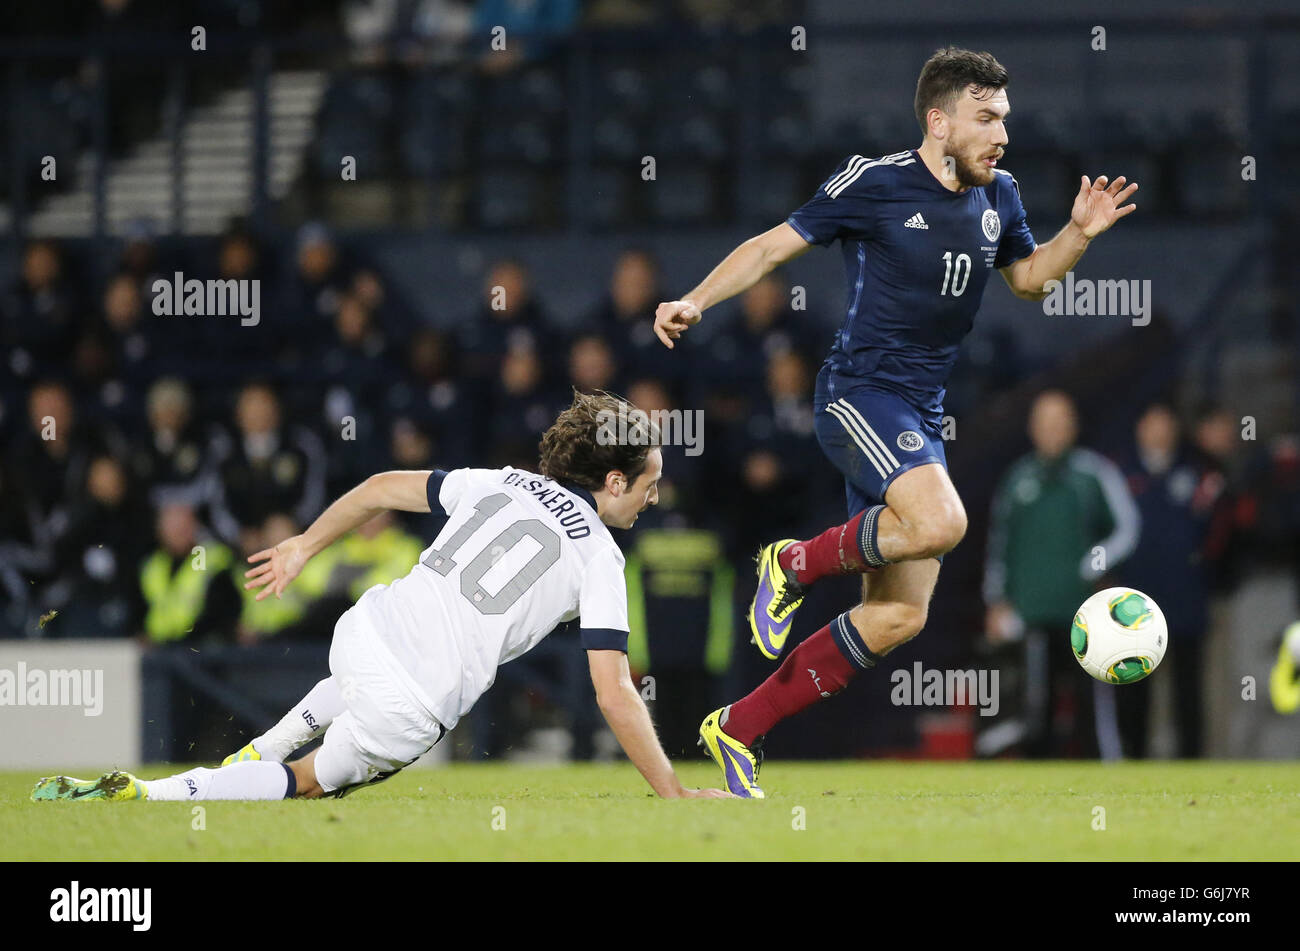 Scotland's Robert Snodgrass and USA's Mix Diskerud battle for the ball during the International Friendly at Hampden Park, Glasgow. Stock Photo